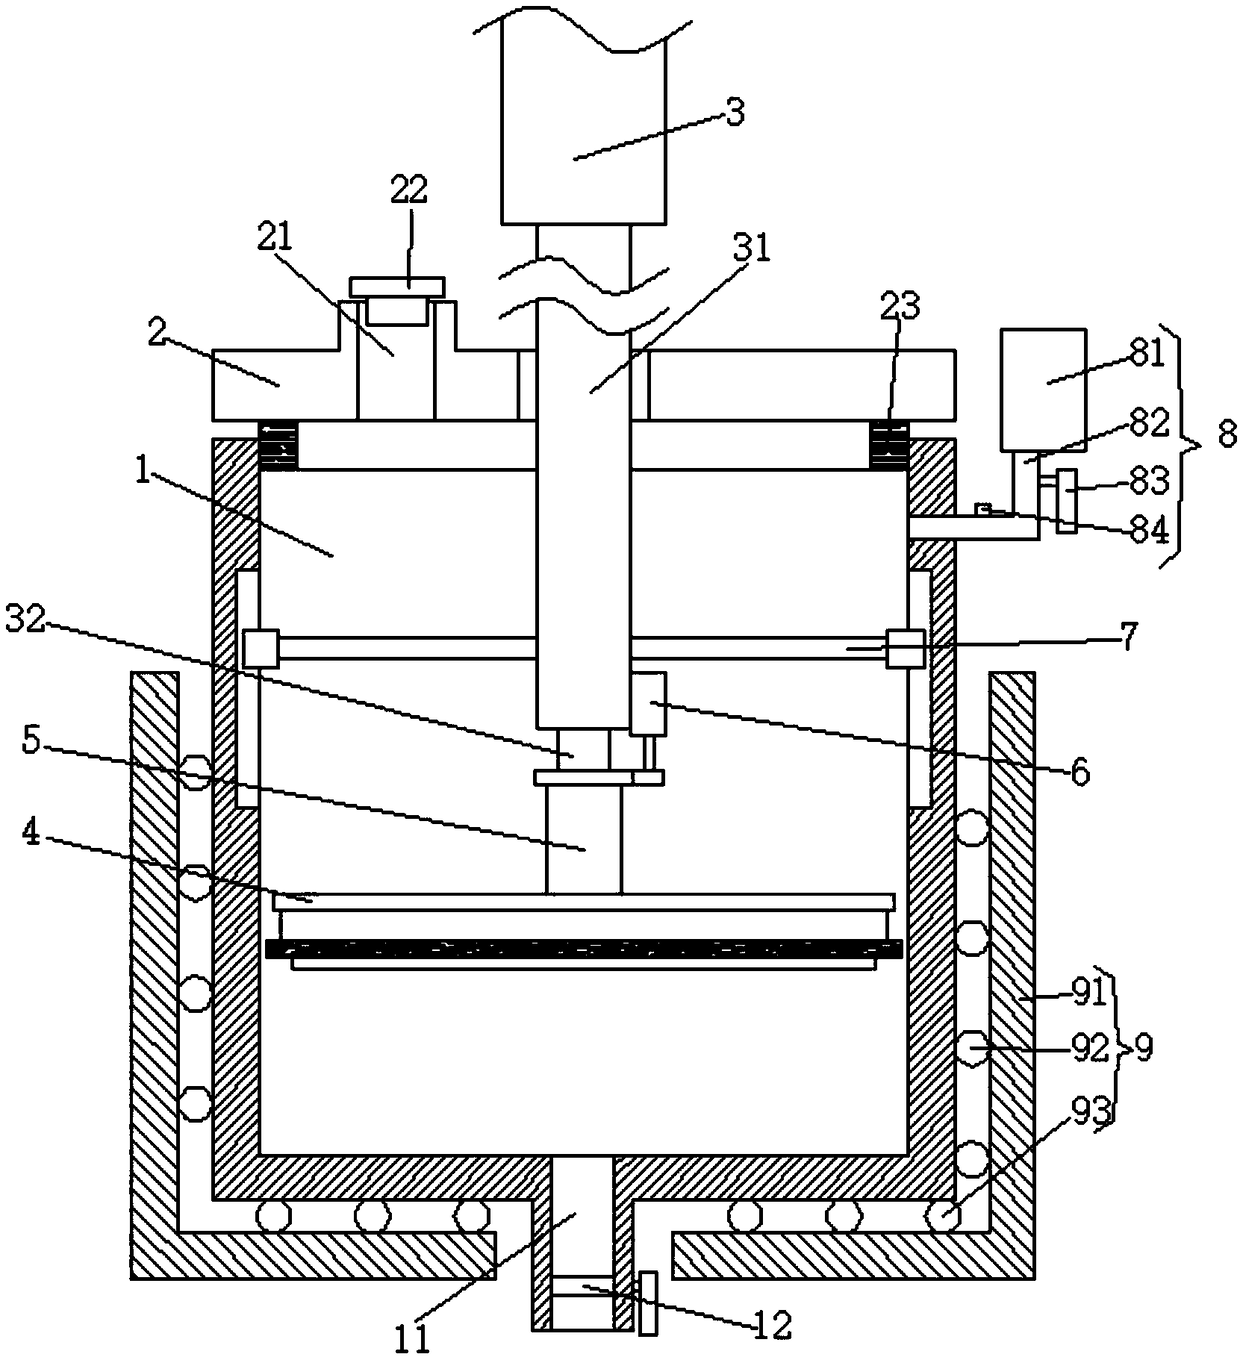 Quantitative glue injection device for high-temperature resin transfer molding